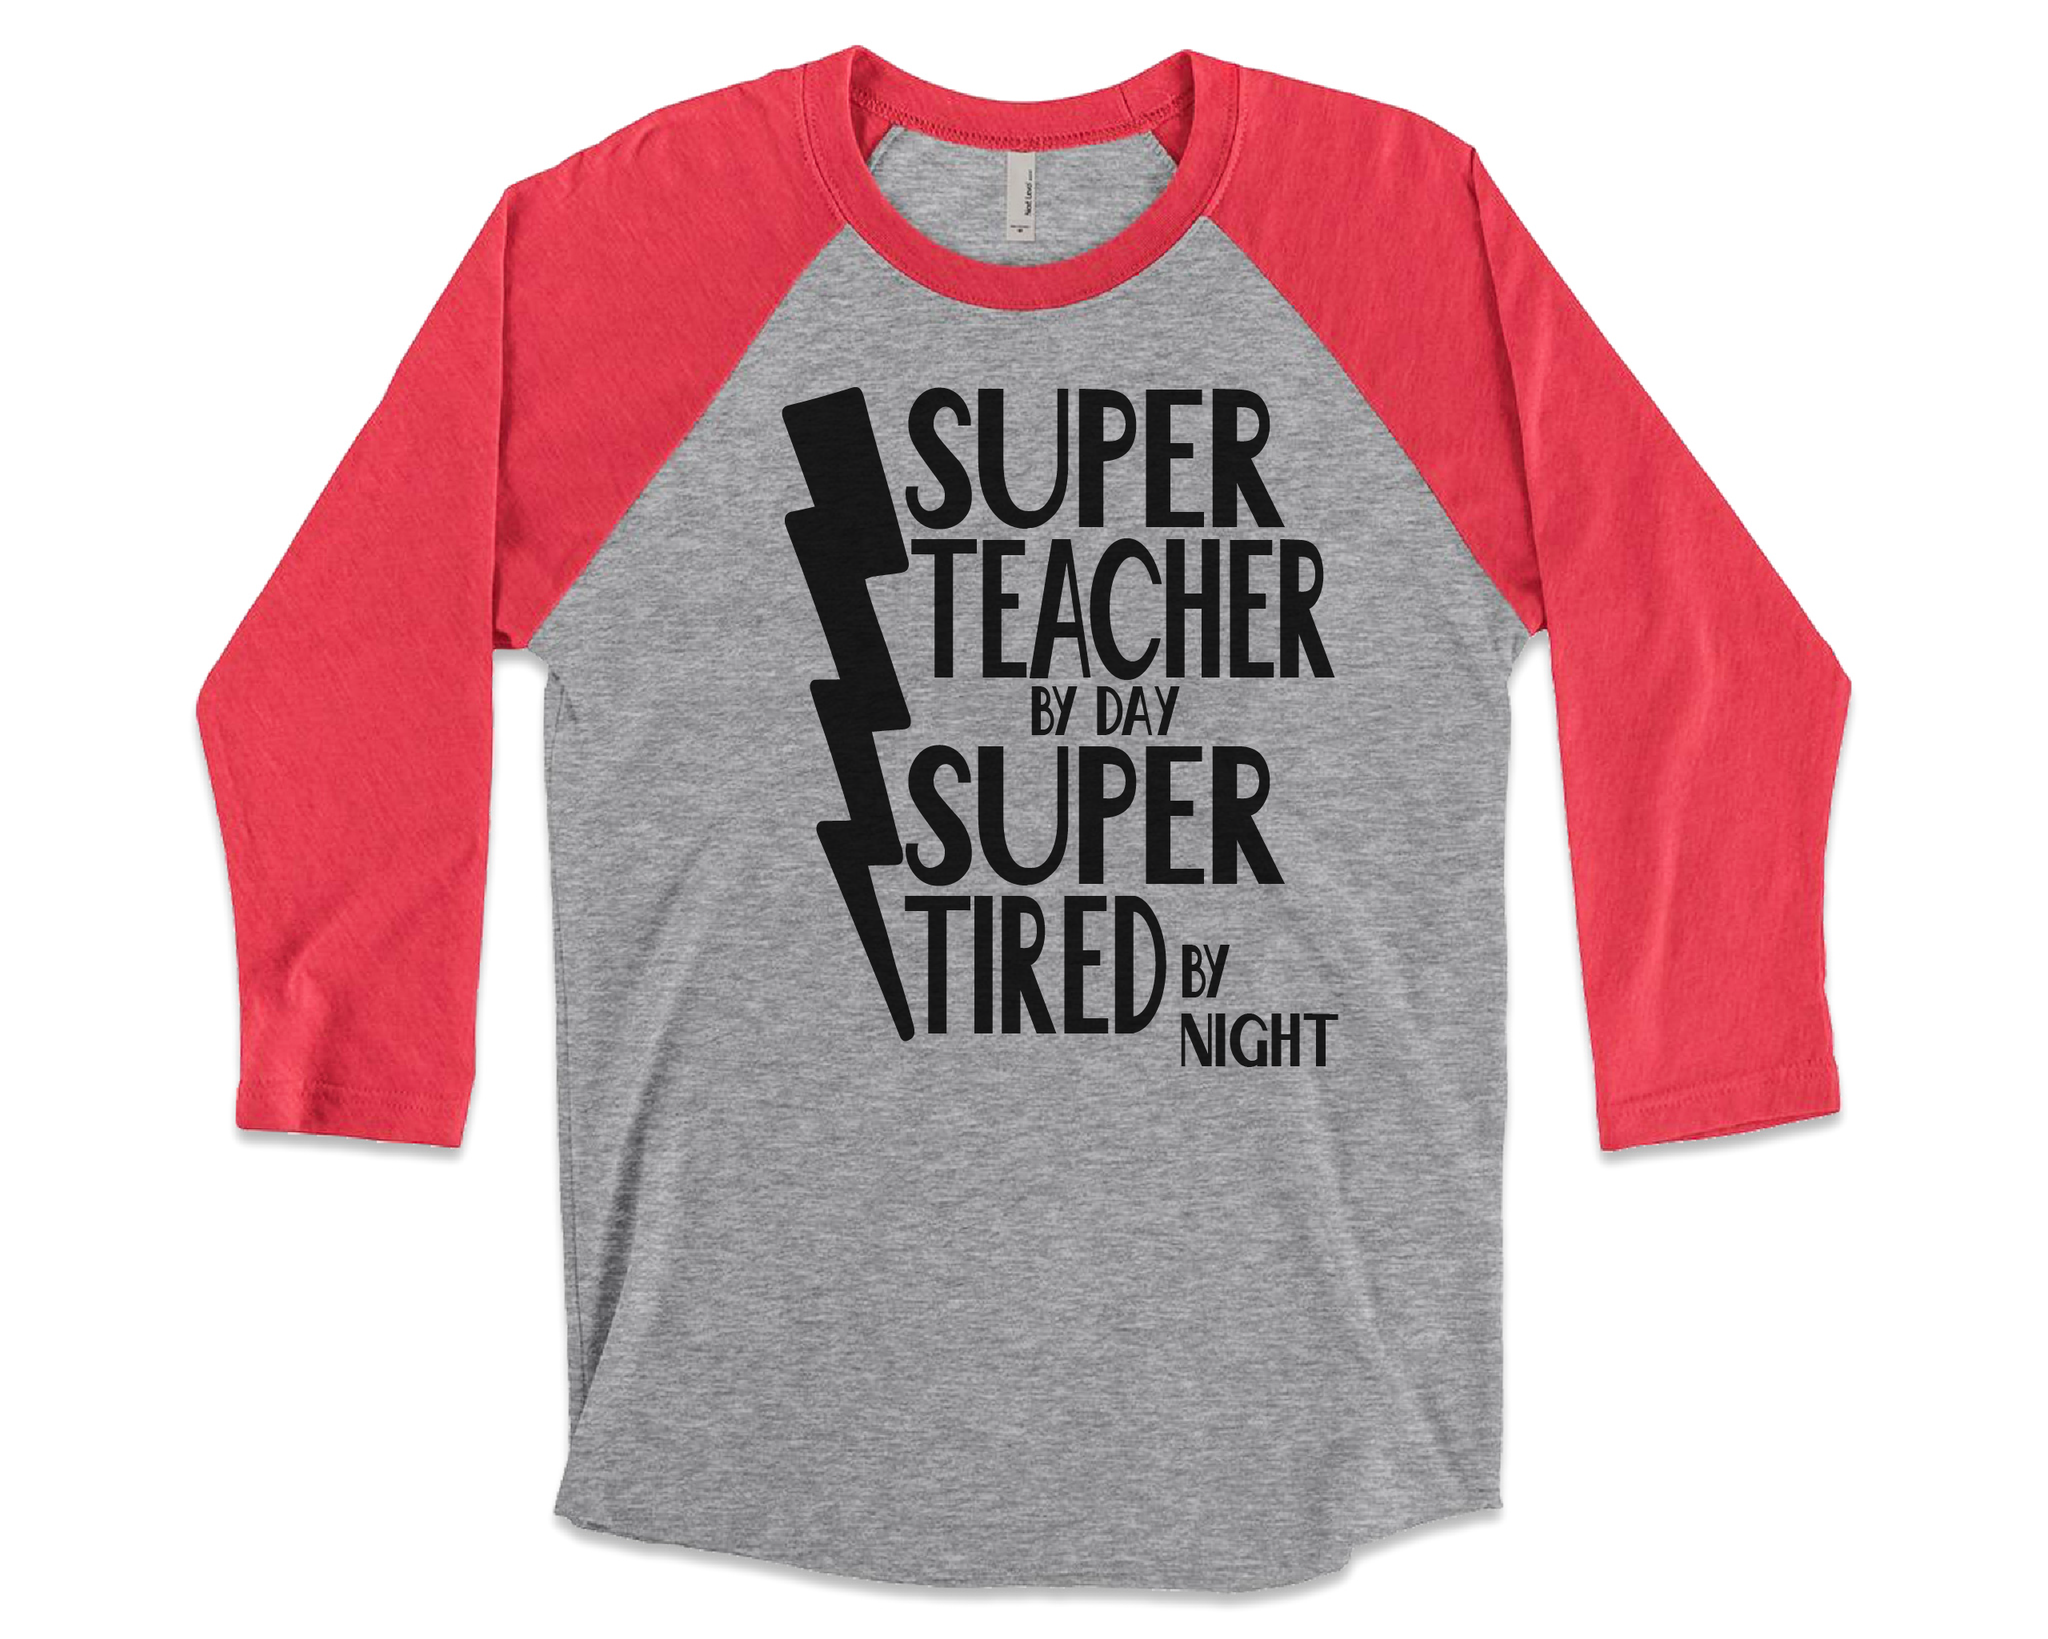 SUPER TEACHER BY DAY SUPER TIRED BY NIGHT RAGLAN T-SHIRT - RED SLEEVE